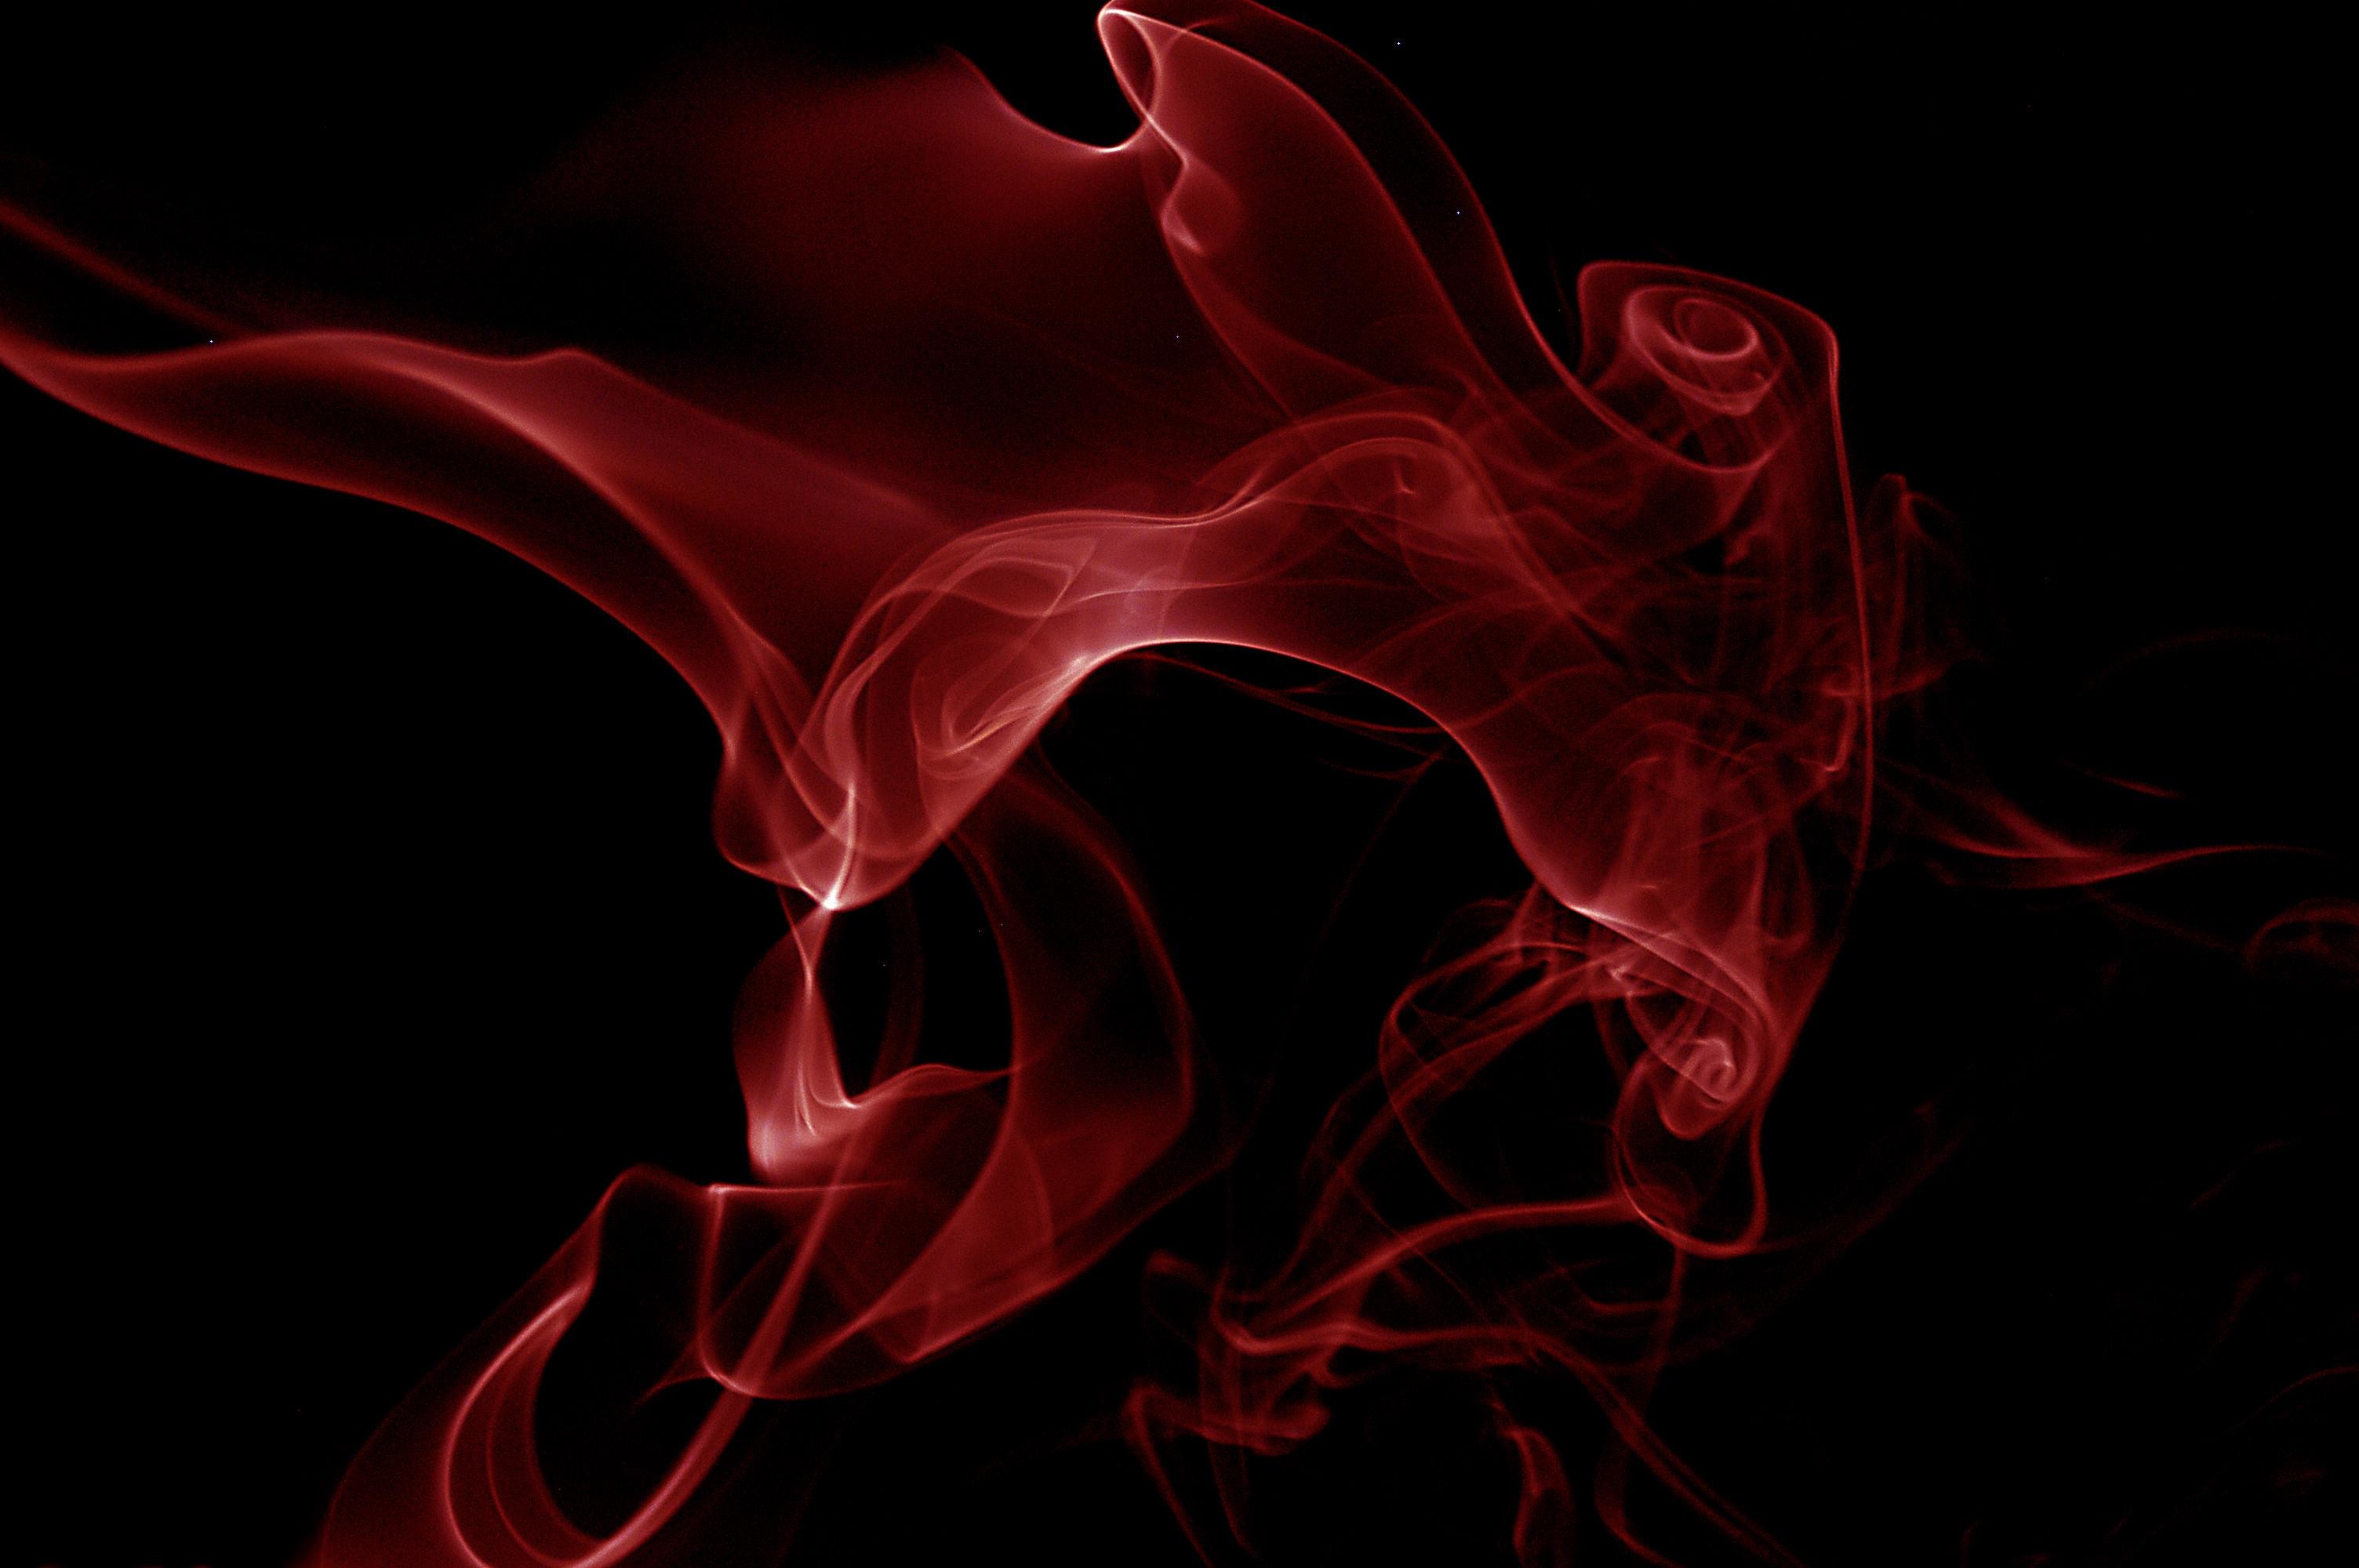 3008x2000 Related searches for 'Red And Black Smoke Background':